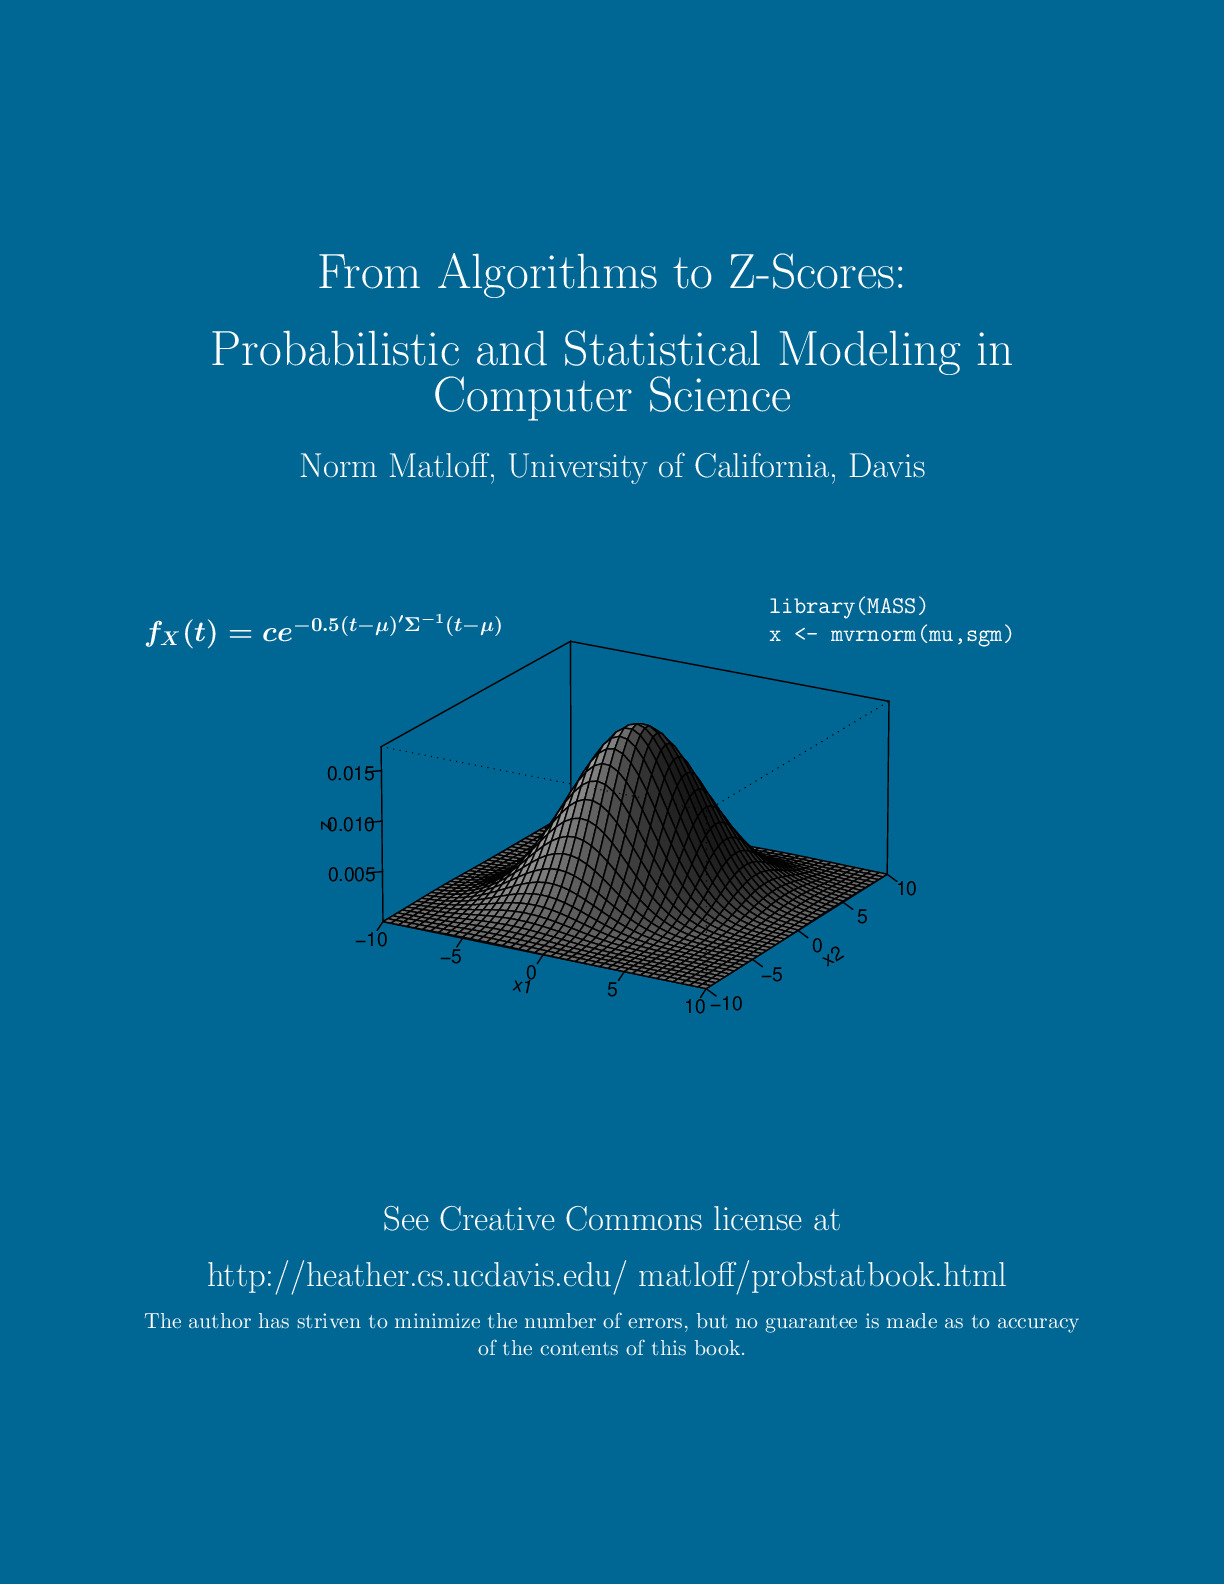 From_Algorithms_to_Z-Scores–Probabilistic_&_Statistical_Modeling_in_Comp_Sci